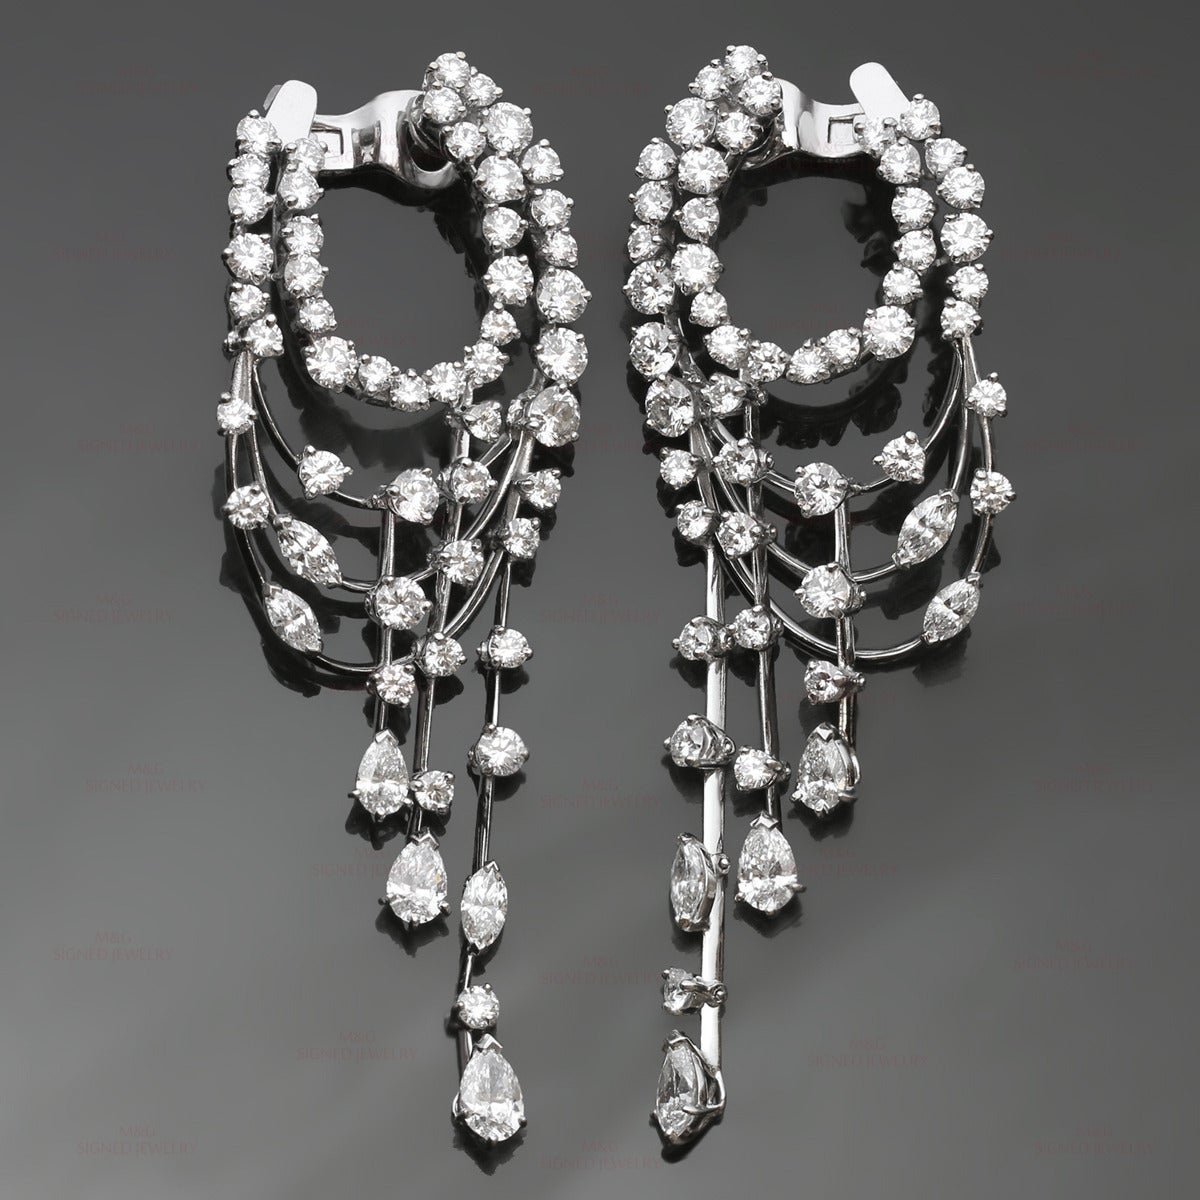 These magnicient chandelier earrings by Van Cleef & Arpels are made in 18k white gold and set with an estimated 9.50 to 10 carats of multi-shaped E-F VVS2-VS1 diamonds. Earrings are completed with clip-on fittings, posts for pierced ears can be